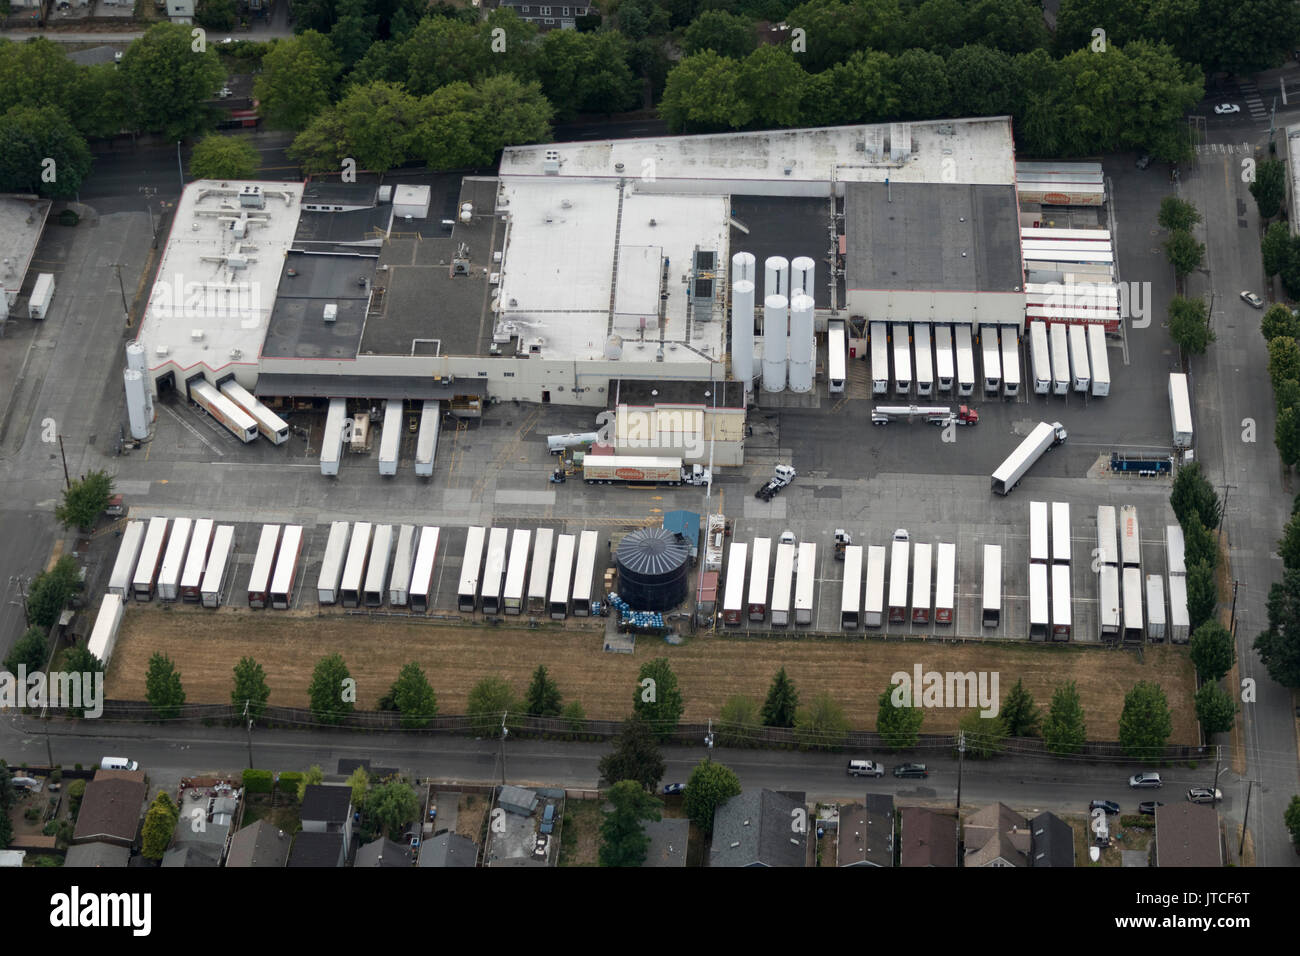 aerial view of Darigold Milk processing products plant, 4058 Rainier Ave S, Seattle, Washington State, USA Stock Photo